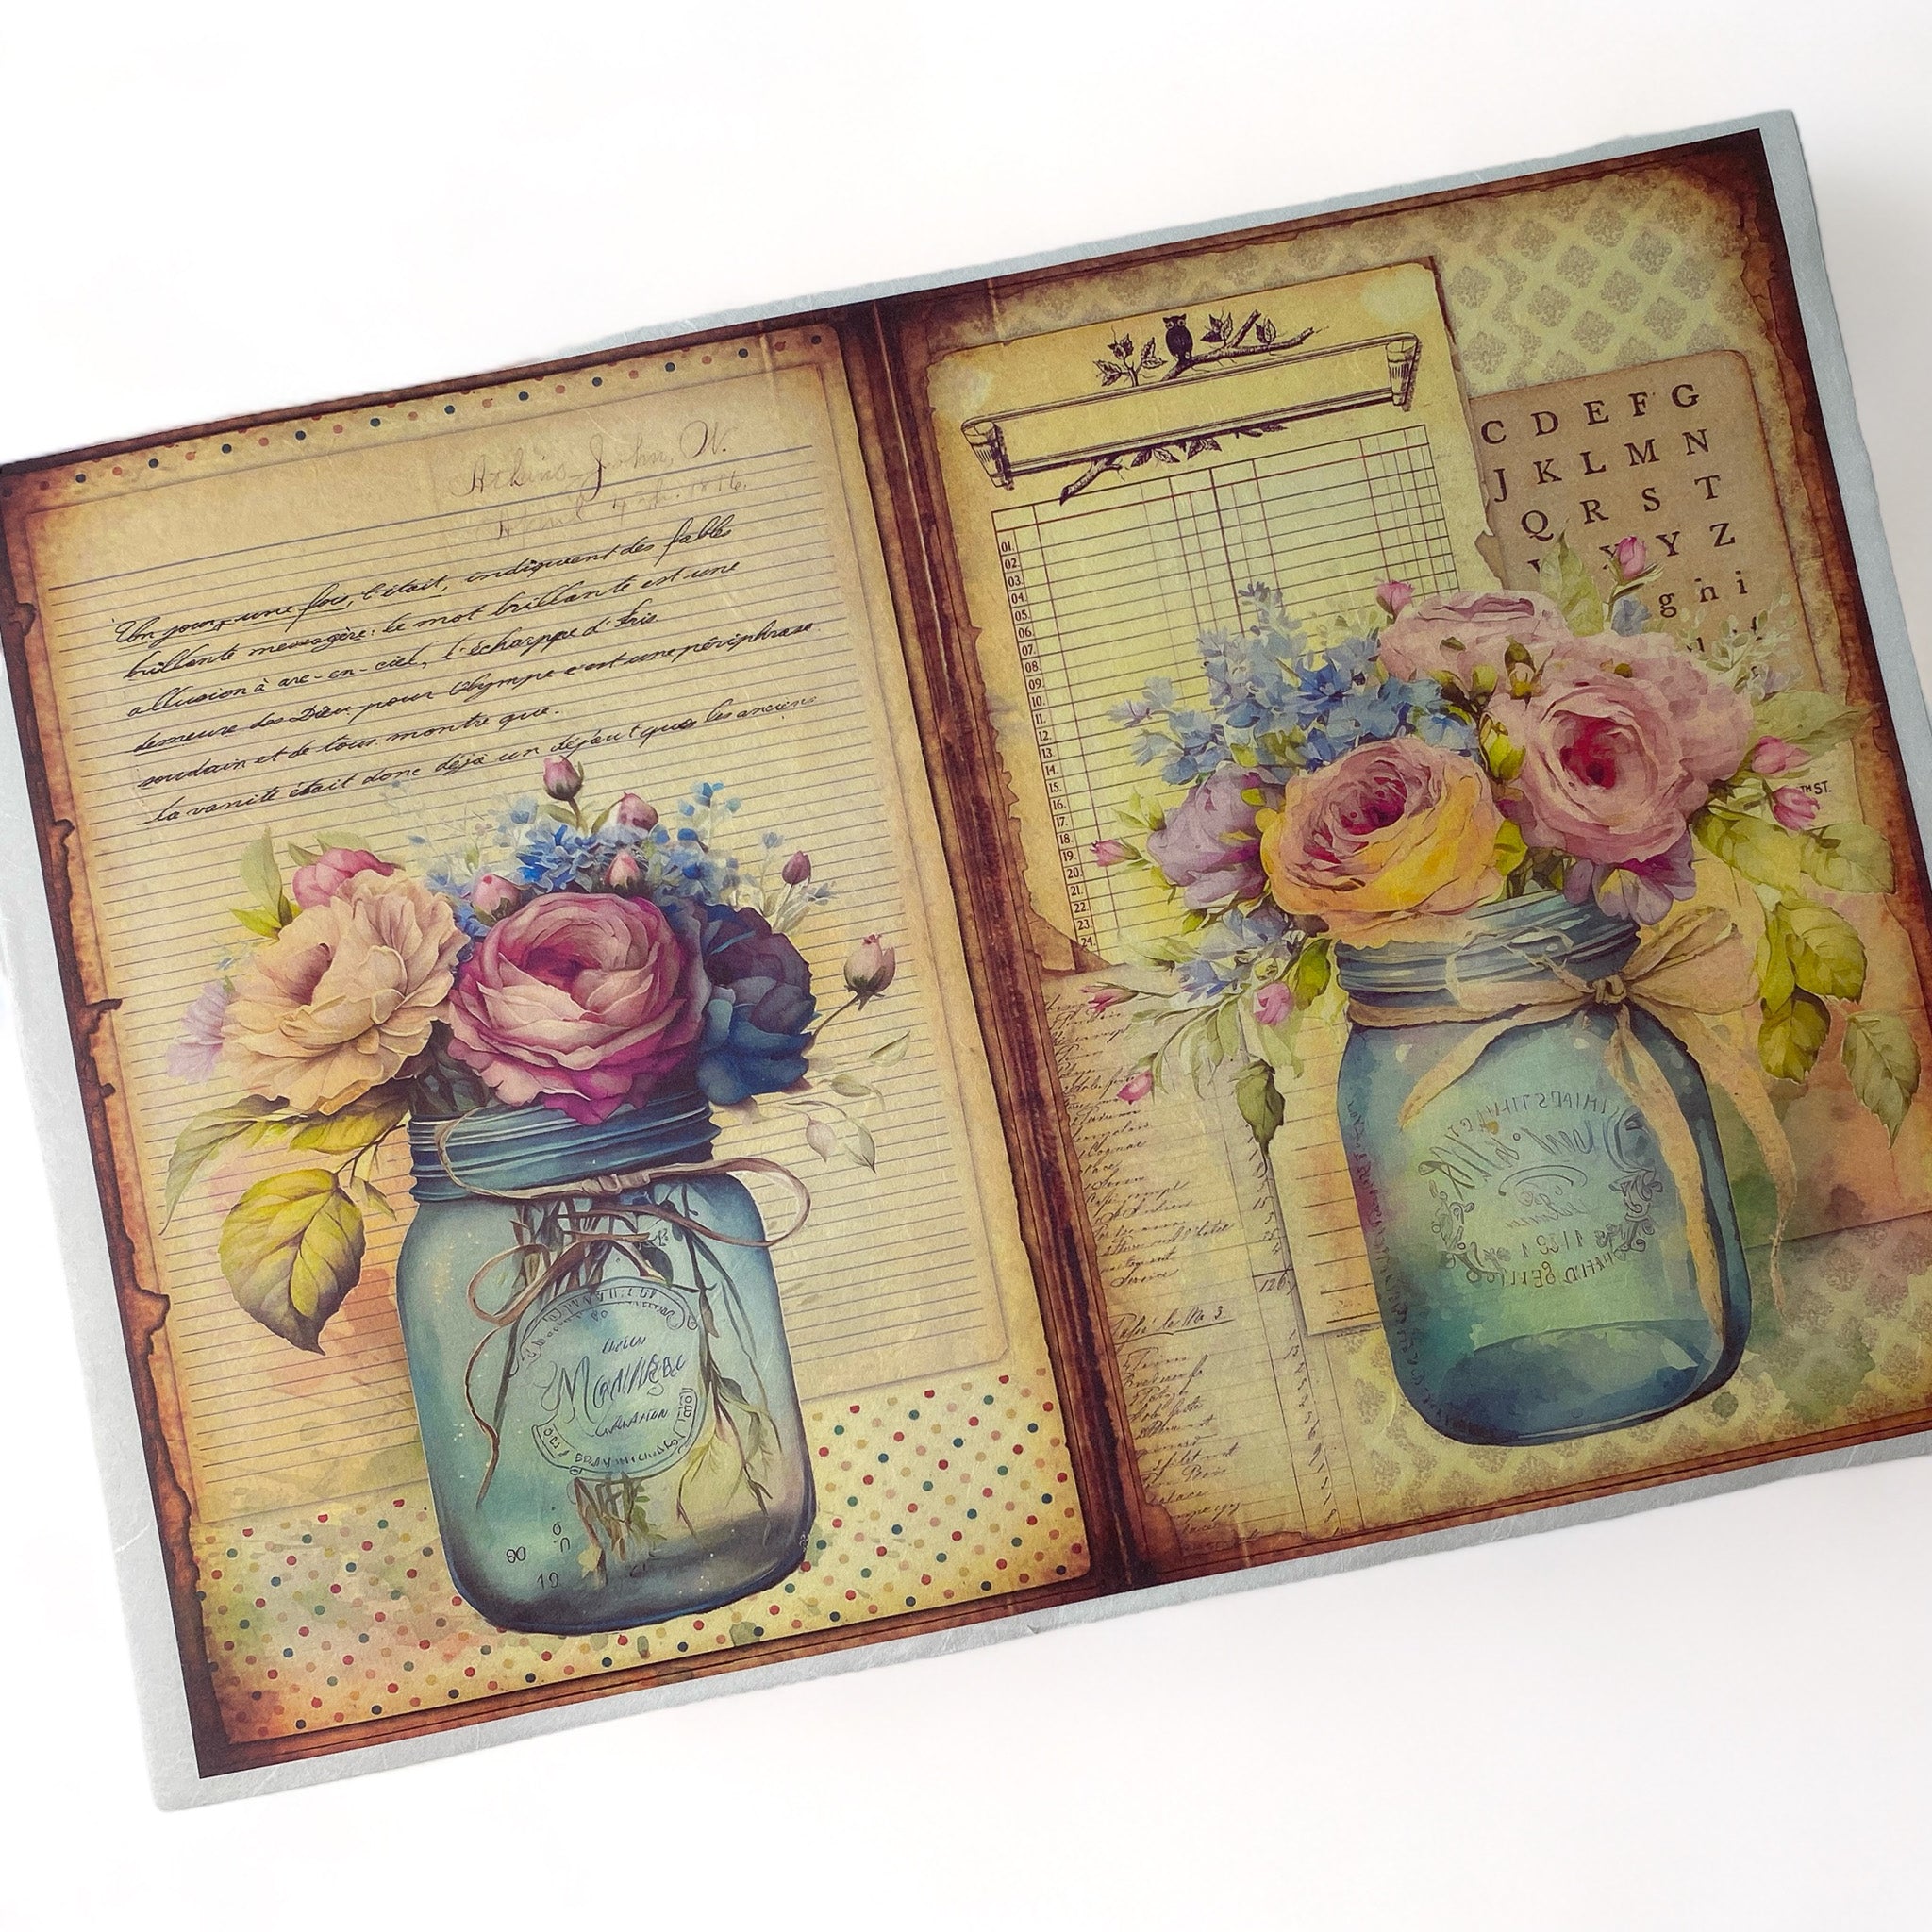 A4 rice paper design that features two charming images of pink flowers in blue mason jars on vintage documents is against a white background.